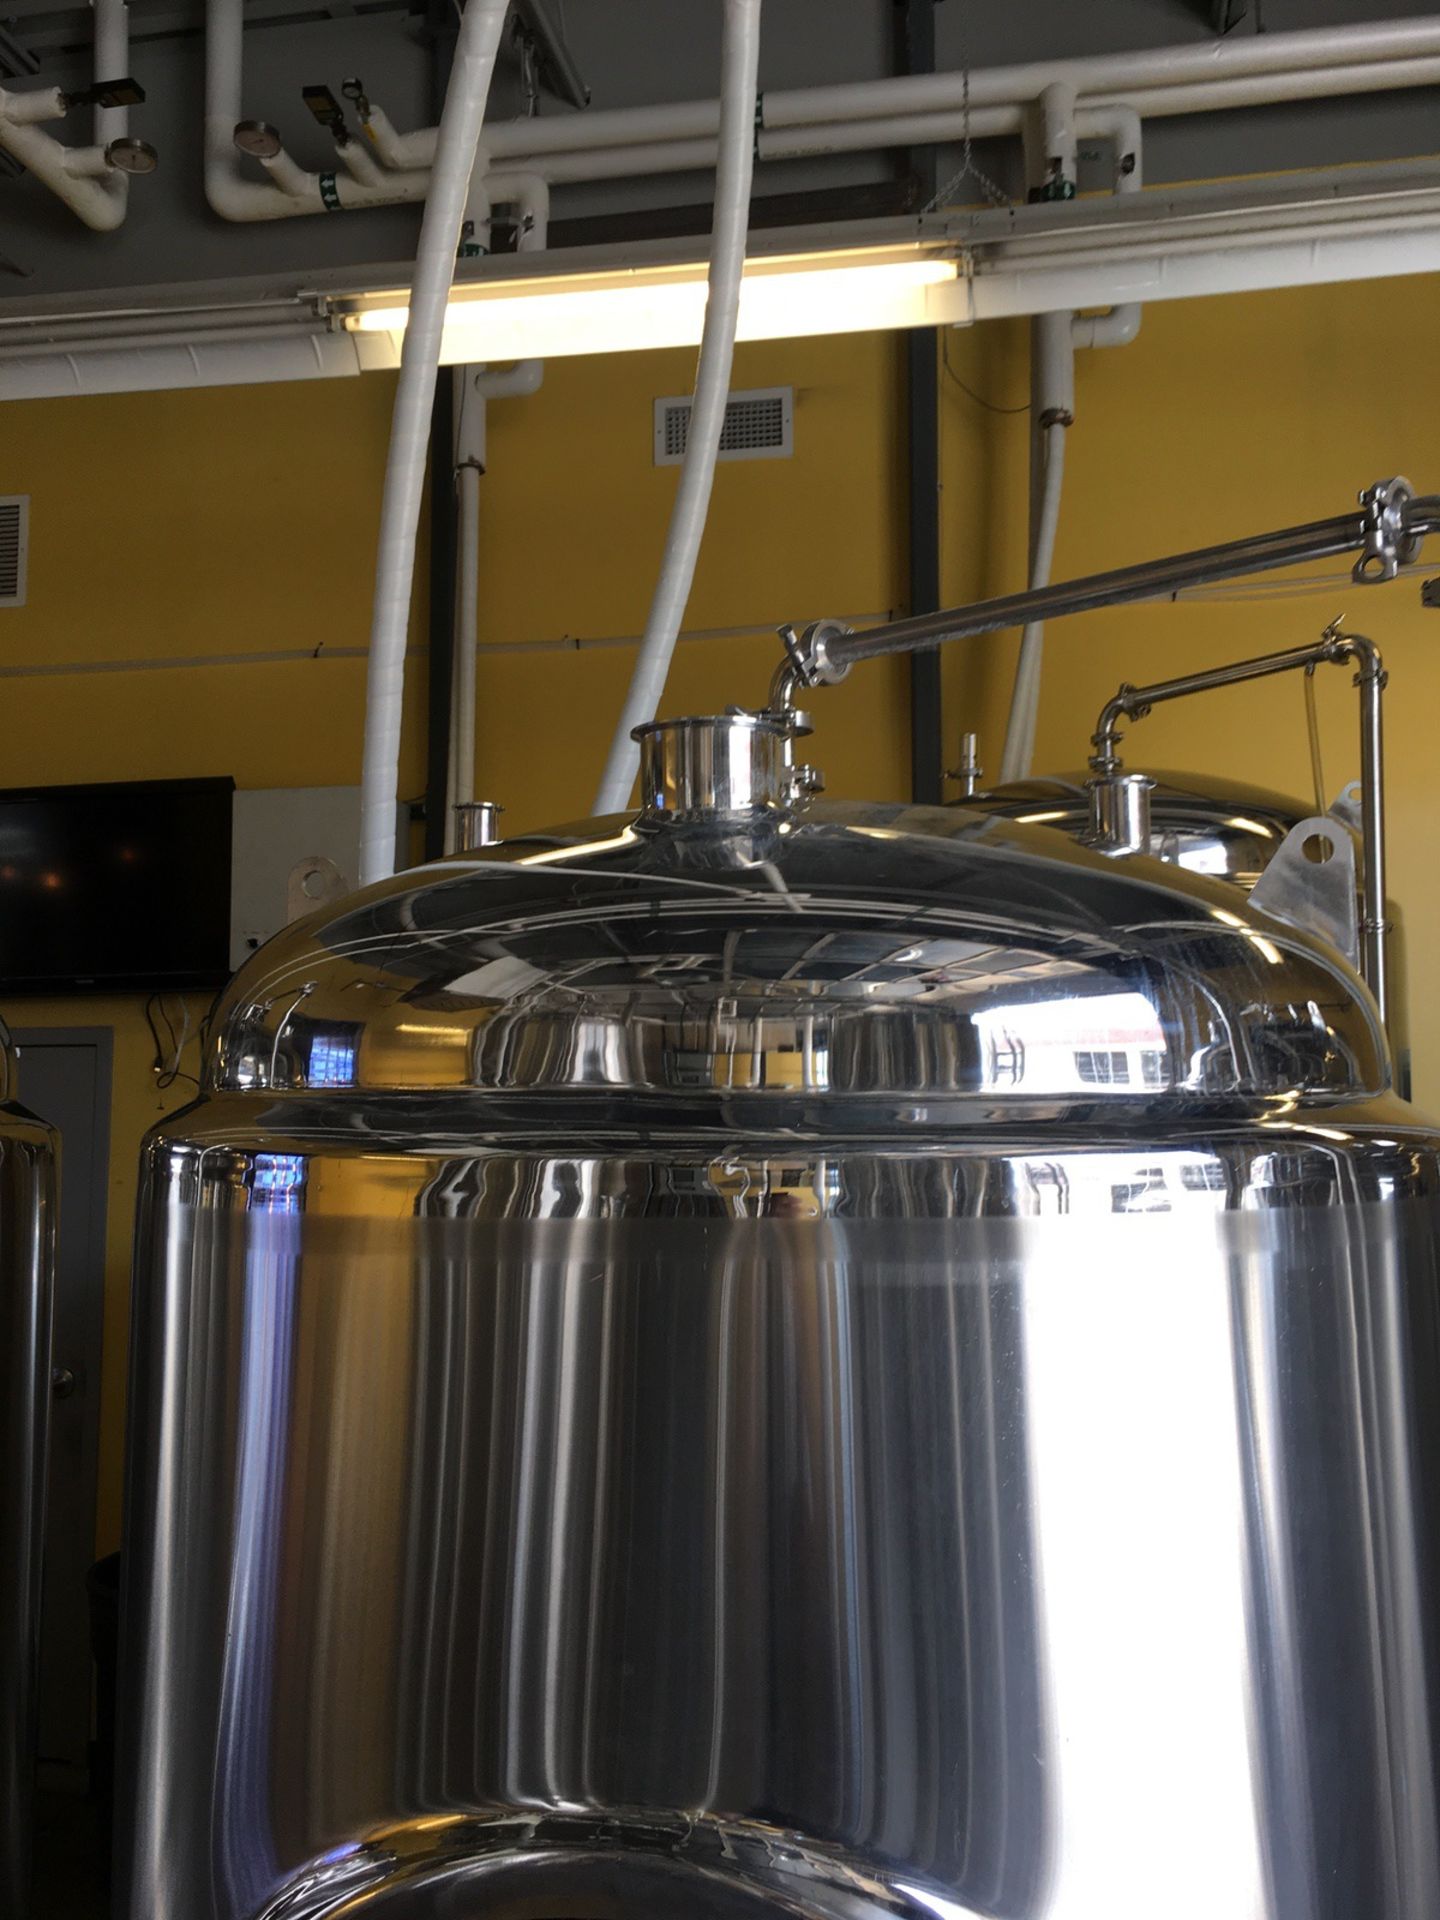 2015 Stout 7 BBL Fermentation Vessel, Stainless Steel, Glycol Ja | Subject to Bulk | Rig Fee: $350 - Image 4 of 8